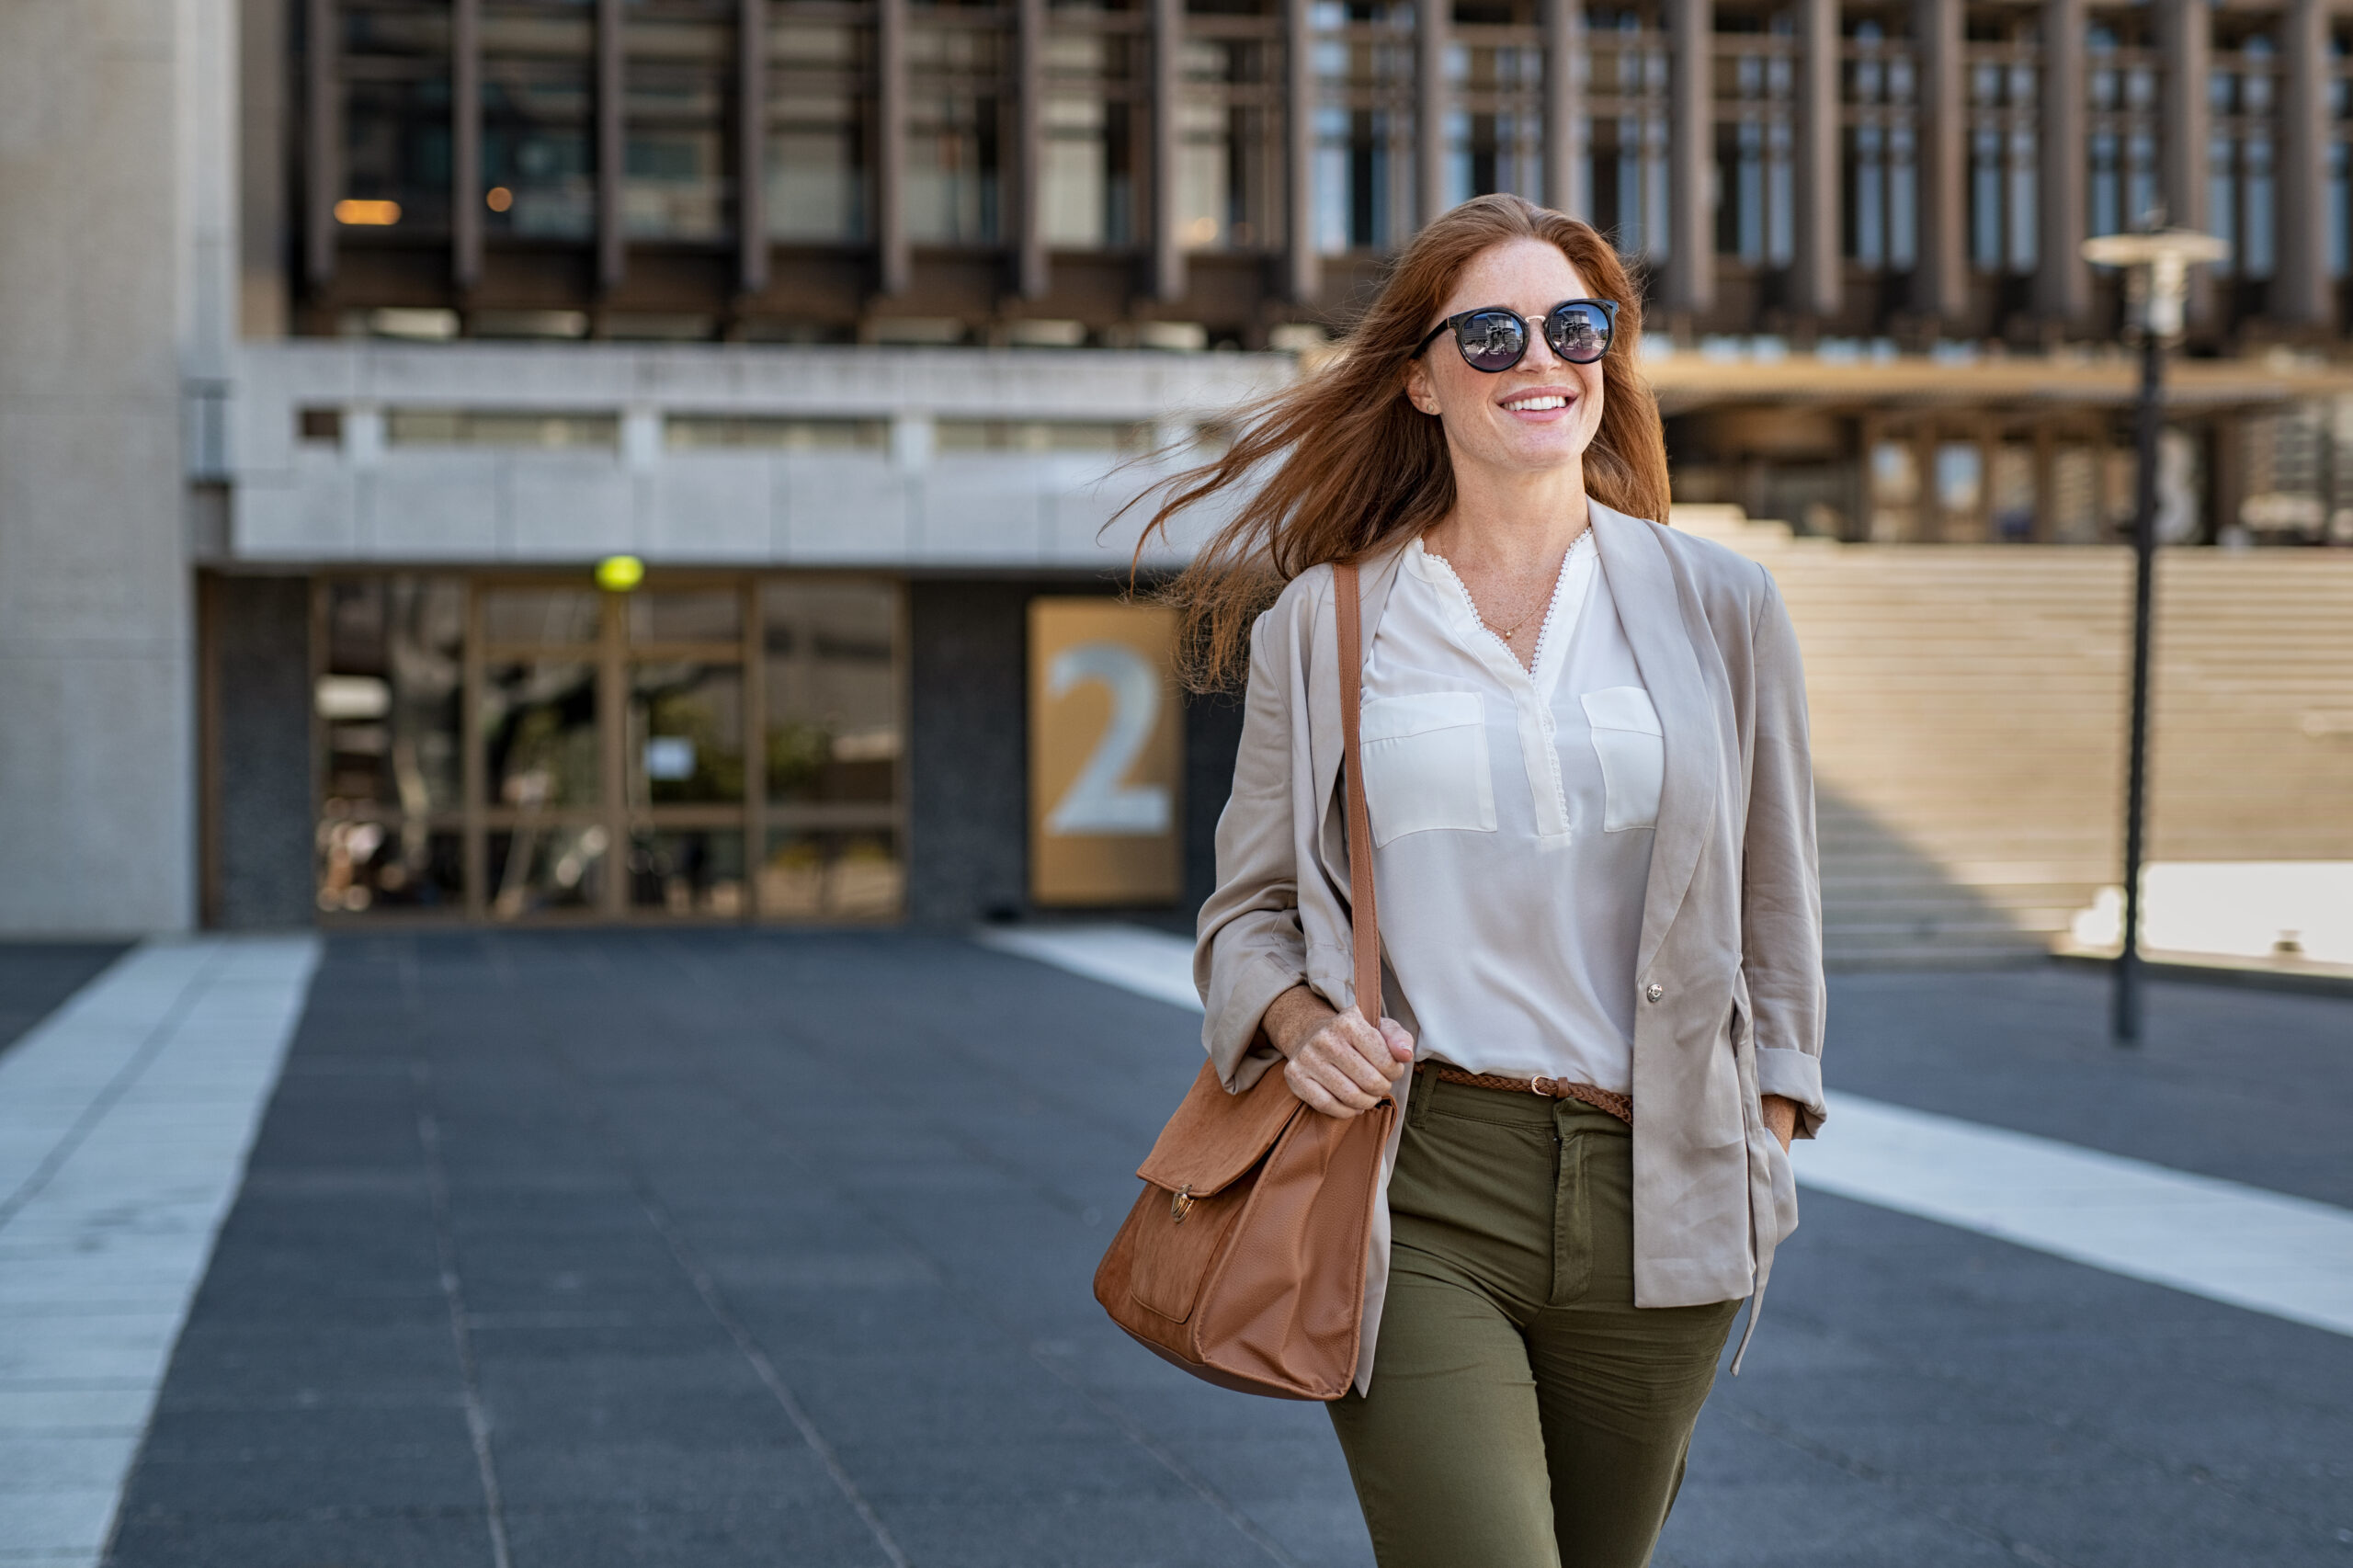 Portrait of successful happy woman on her way to work on street. Confident business woman wearing blazer carrying side bag walking with a smile. Smiling woman wearing sunglasses and walking on street.;